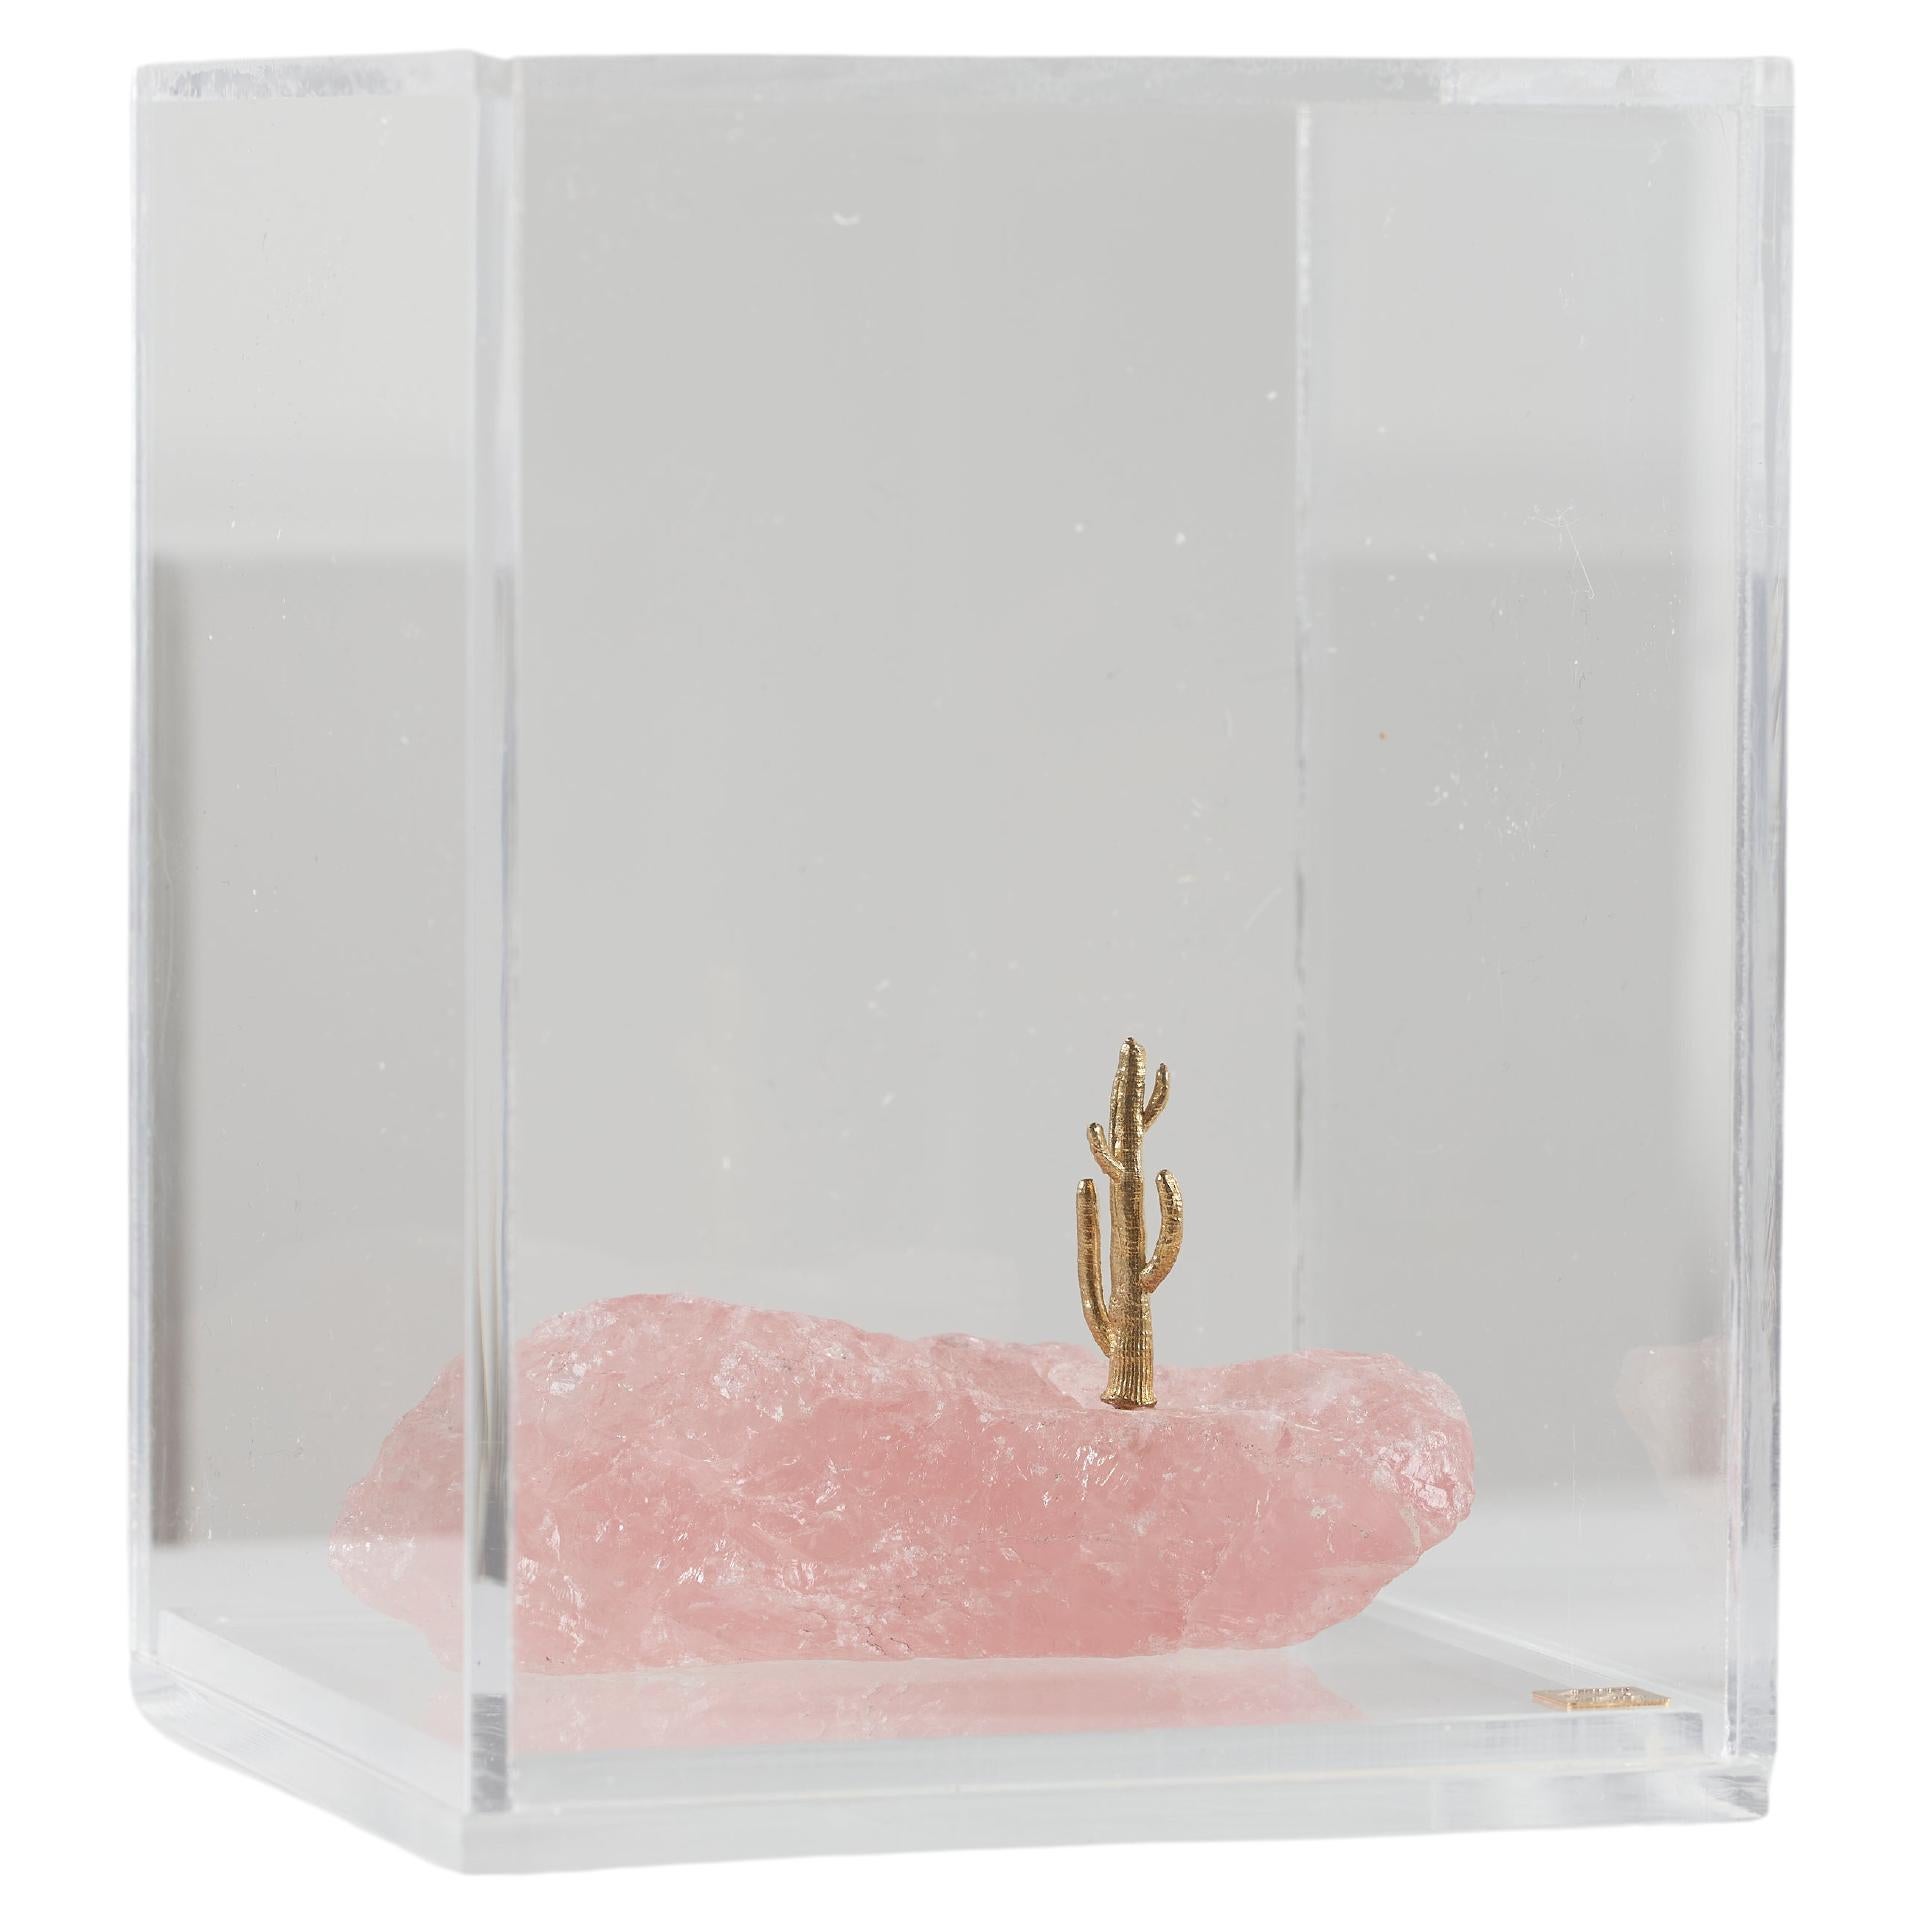 Mandacaru Series, Stone and Brass Cactus Sculpture in Acrylic Box